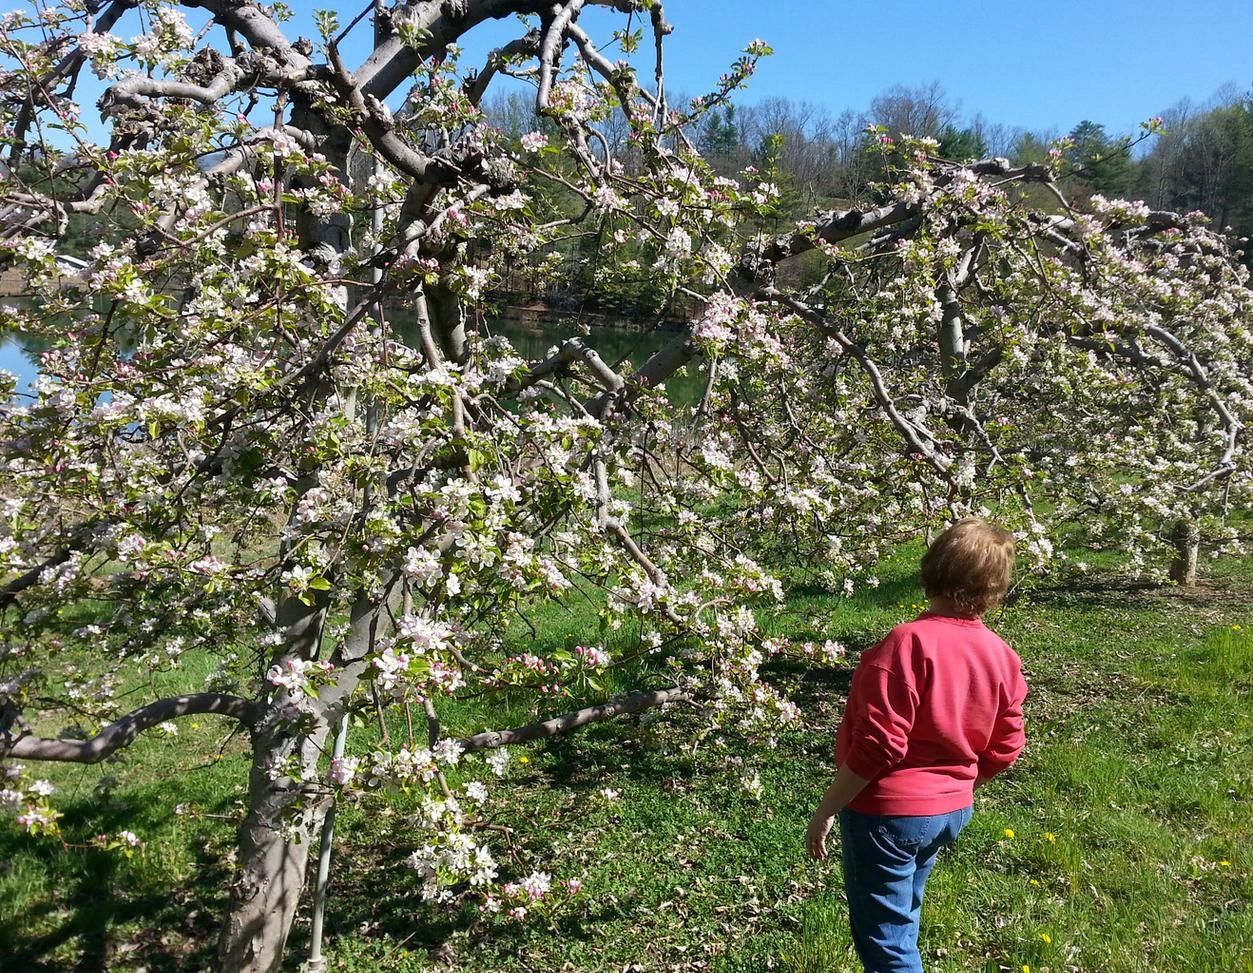 This is my wife (Jean) looking at Saylor Sunrise apple trees at the lower level of our orchard.